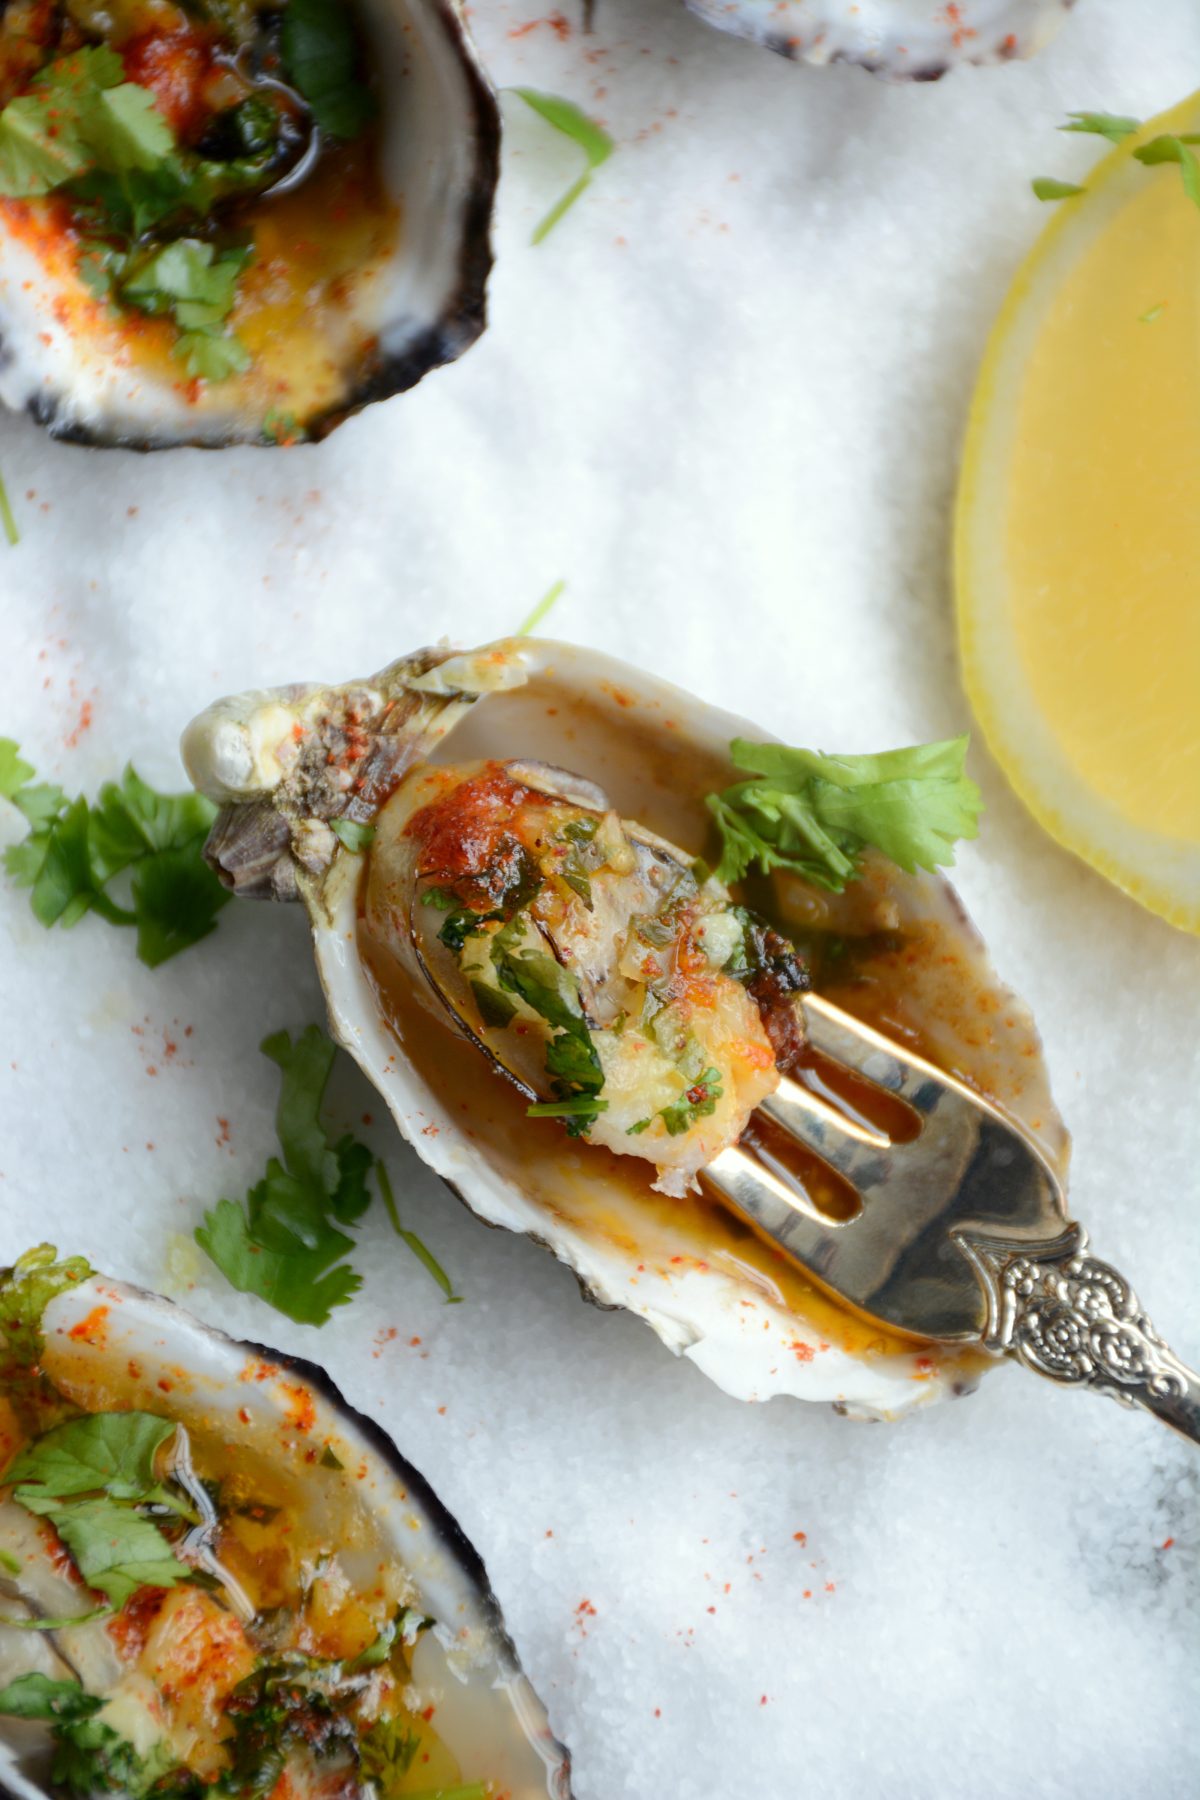 Baked Oysters with Garlic, Curry Leaf and Kashmiri Chilli - Soft, plump and juicy oysters are oven baked with a garlic and curry leaf butter emulsion, coriander leaves and Kashmiri chilli powder - thespiceadventuress.com